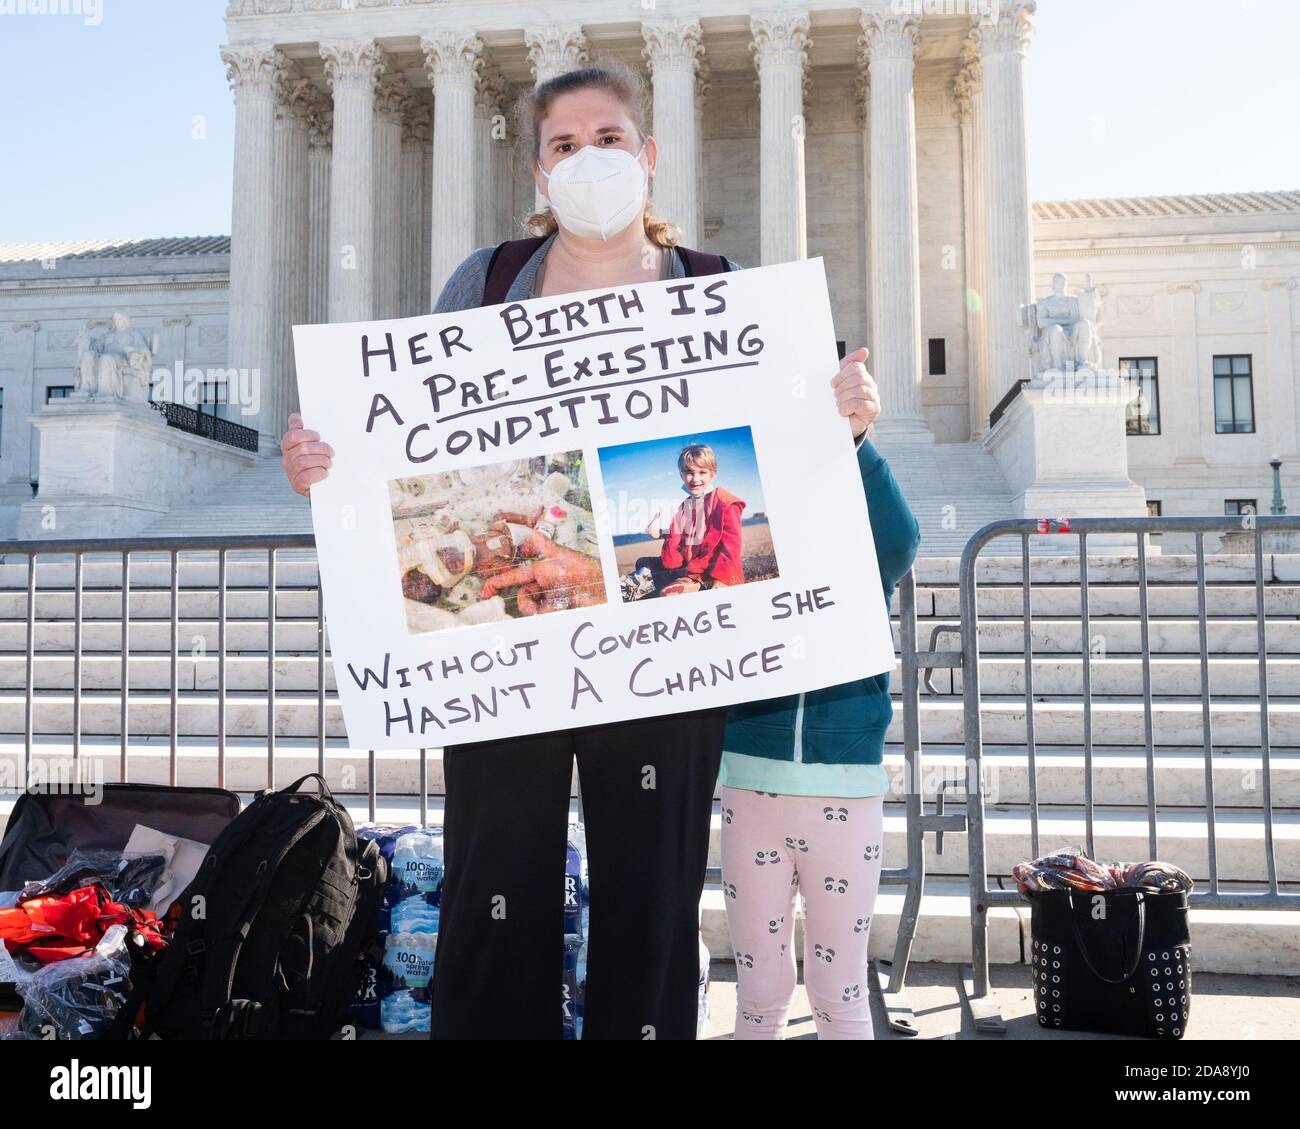 Washington, U.S. 10th Nov, 2020. November 10, 2020 - Washington, DC, United States: Woman with a sign saying 'Her birth is a pre-existing condition, without coverage she hasn't a chance' at a demonstration in front of the Supreme Court in favor of the Affordable Care Act (ACA) on the day that the Supreme Court is hearing arguments in a case regarding it. (Photo by Michael Brochstein/Sipa USA) Credit: Sipa USA/Alamy Live News Stock Photo